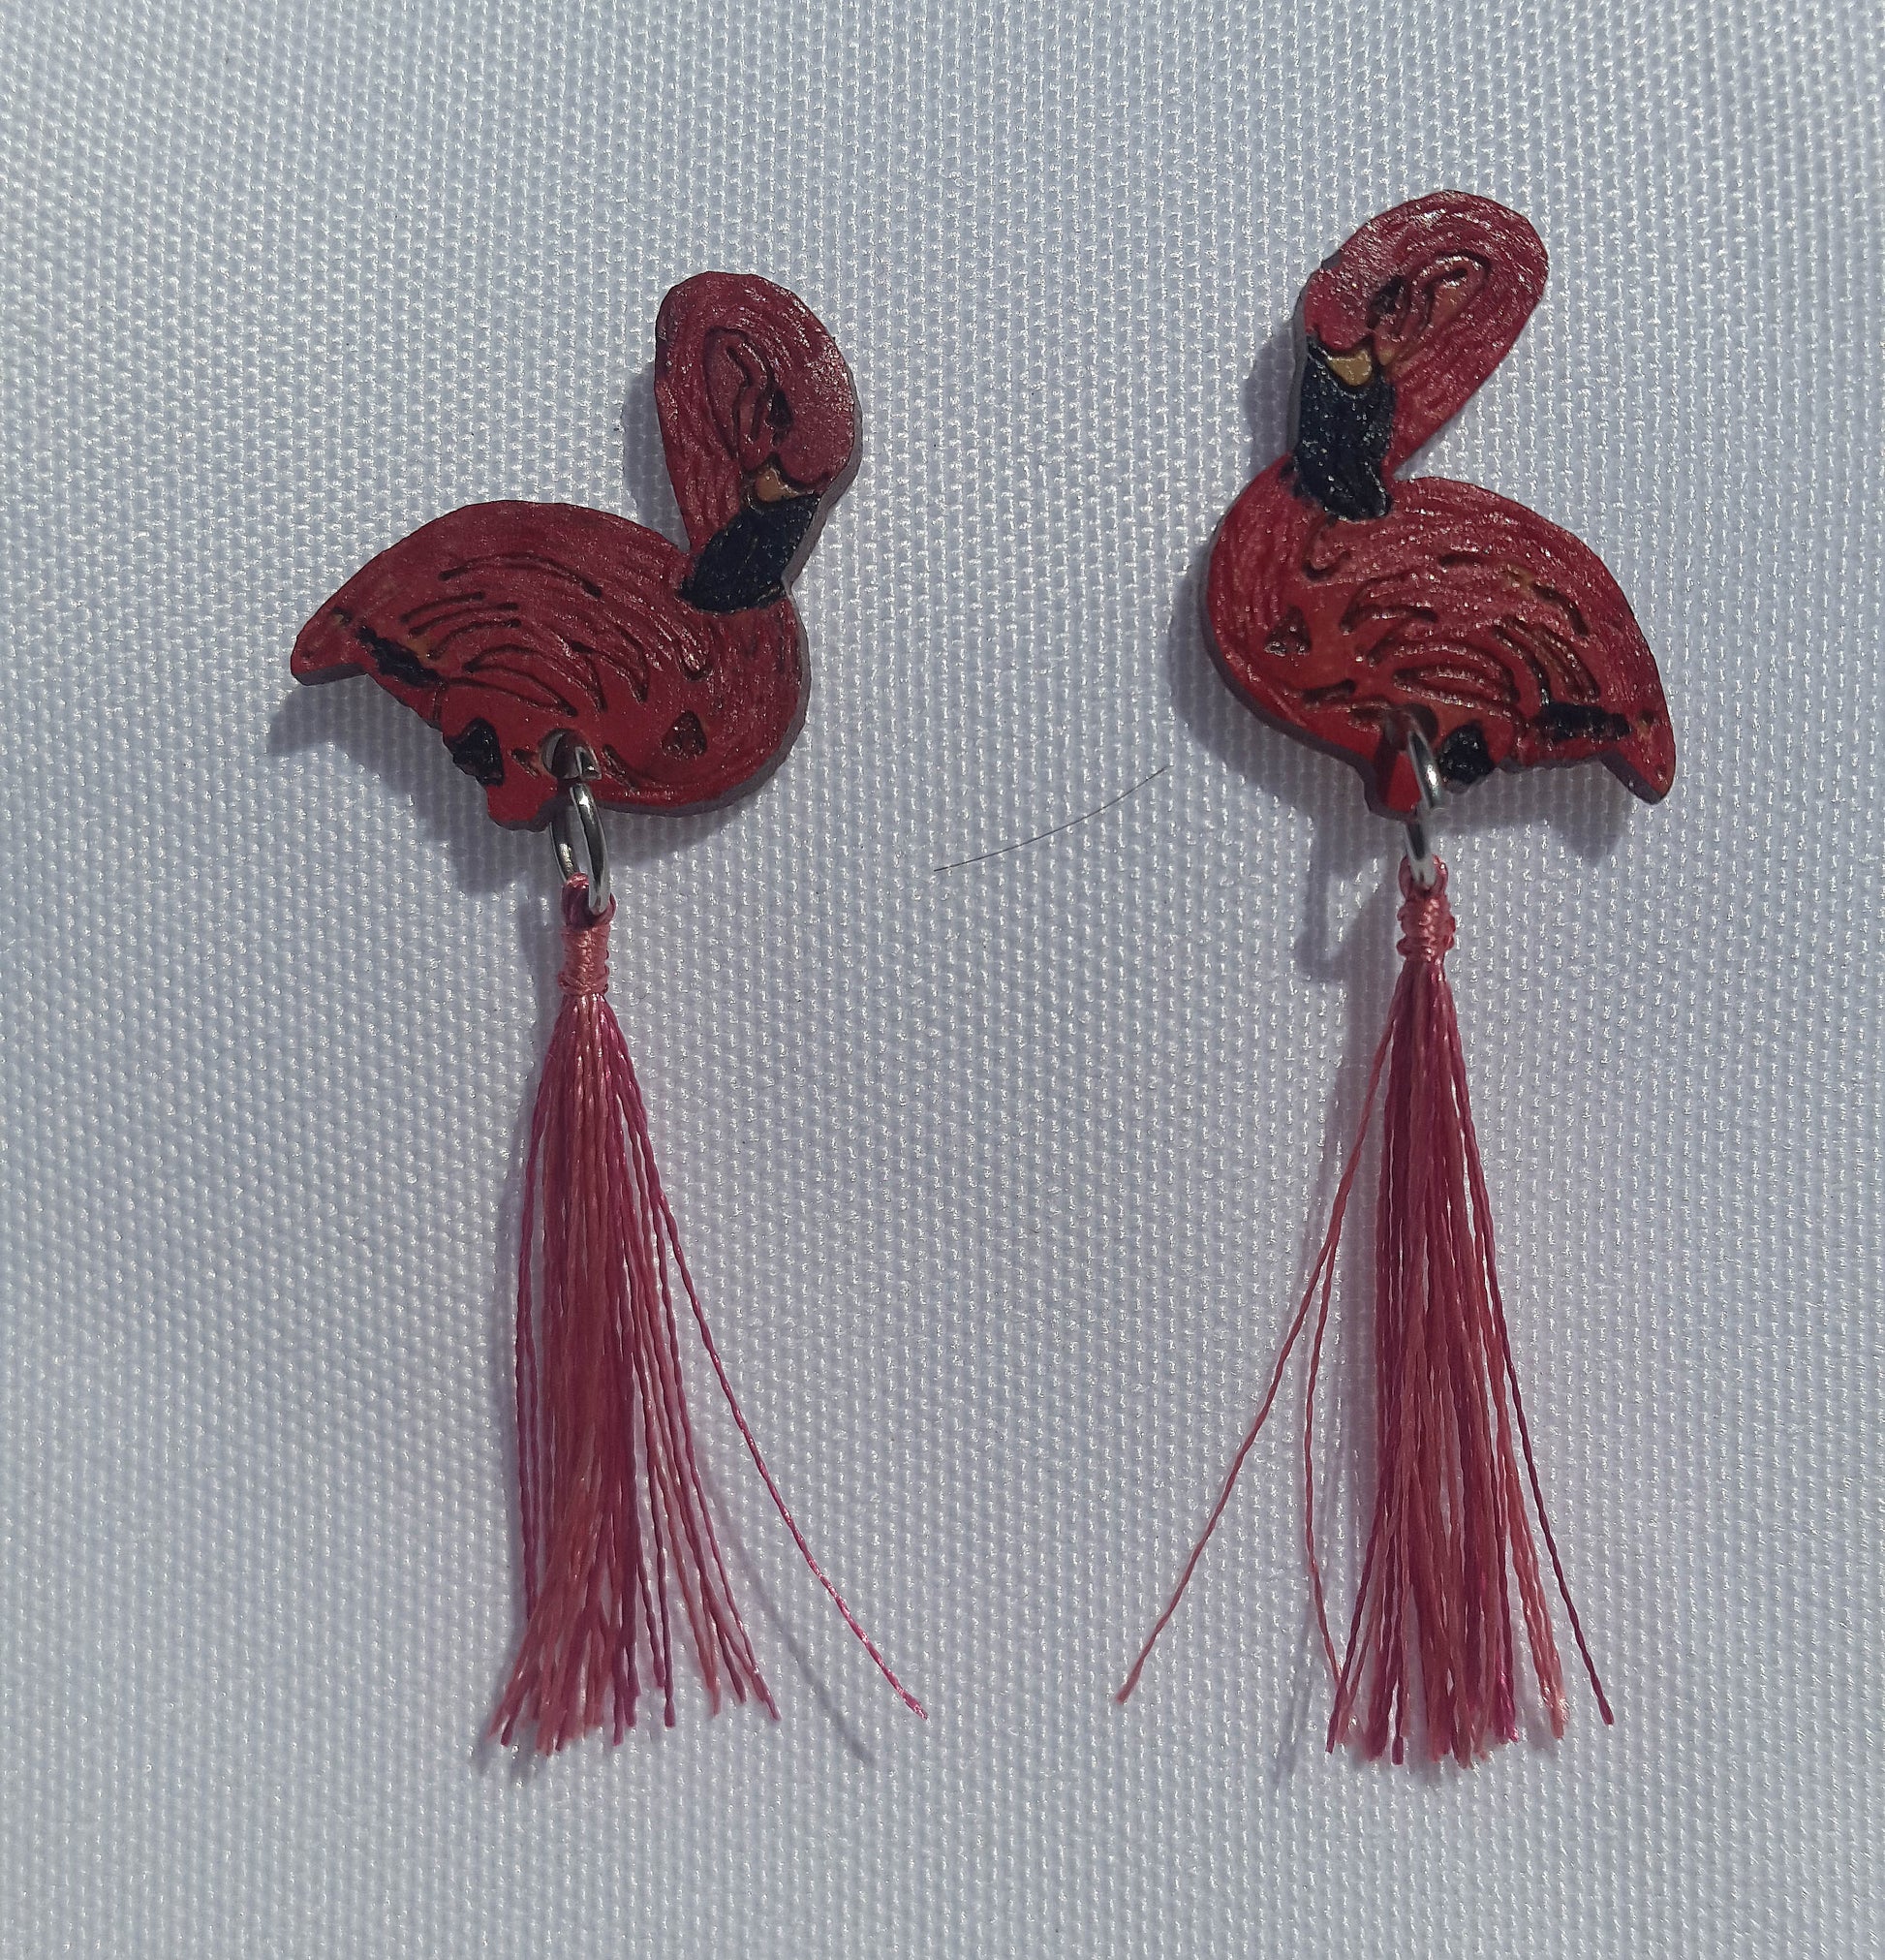 Small earrings Flamingo style - gifts for mom - kmnk deco